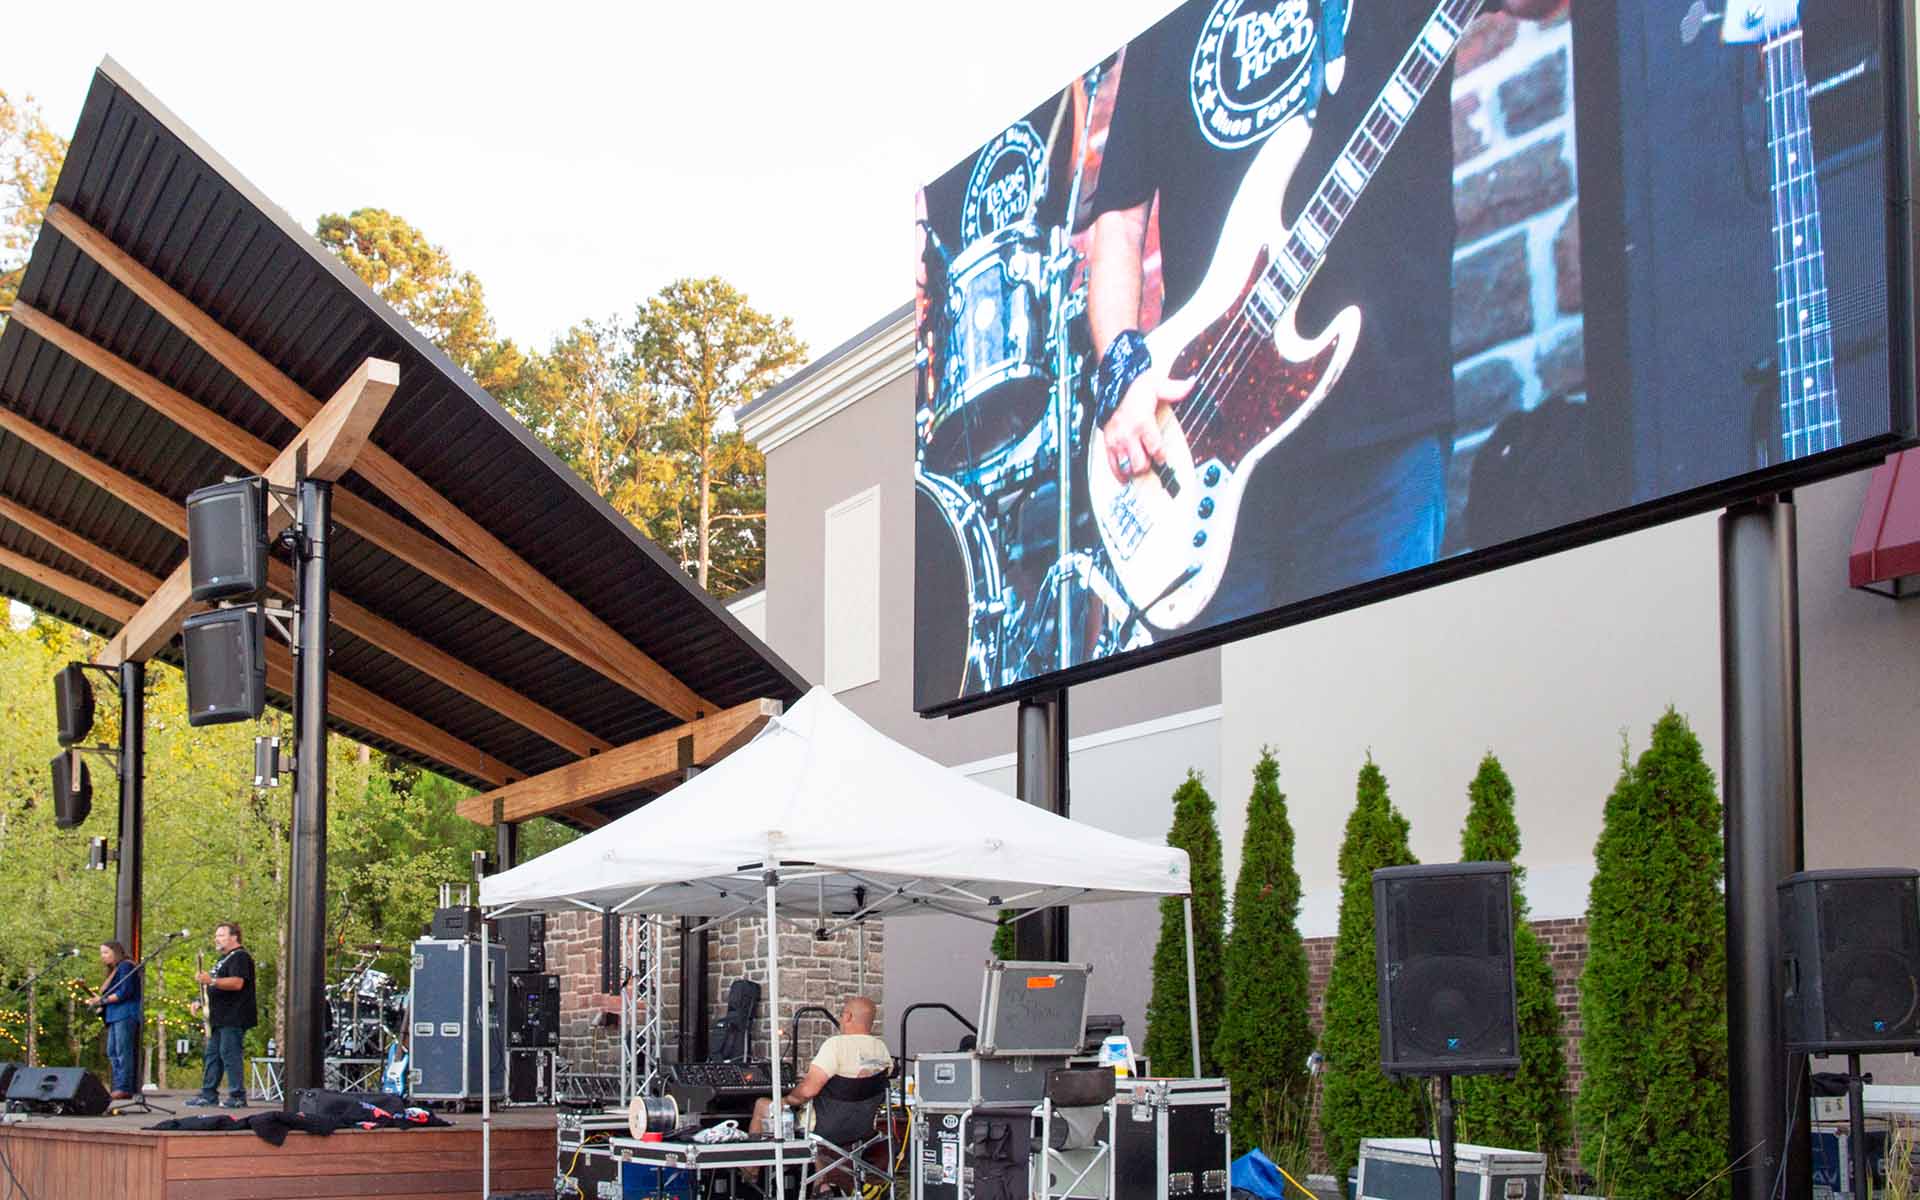 Outdoor stage and LED screen at Peachtree Corners Town Green